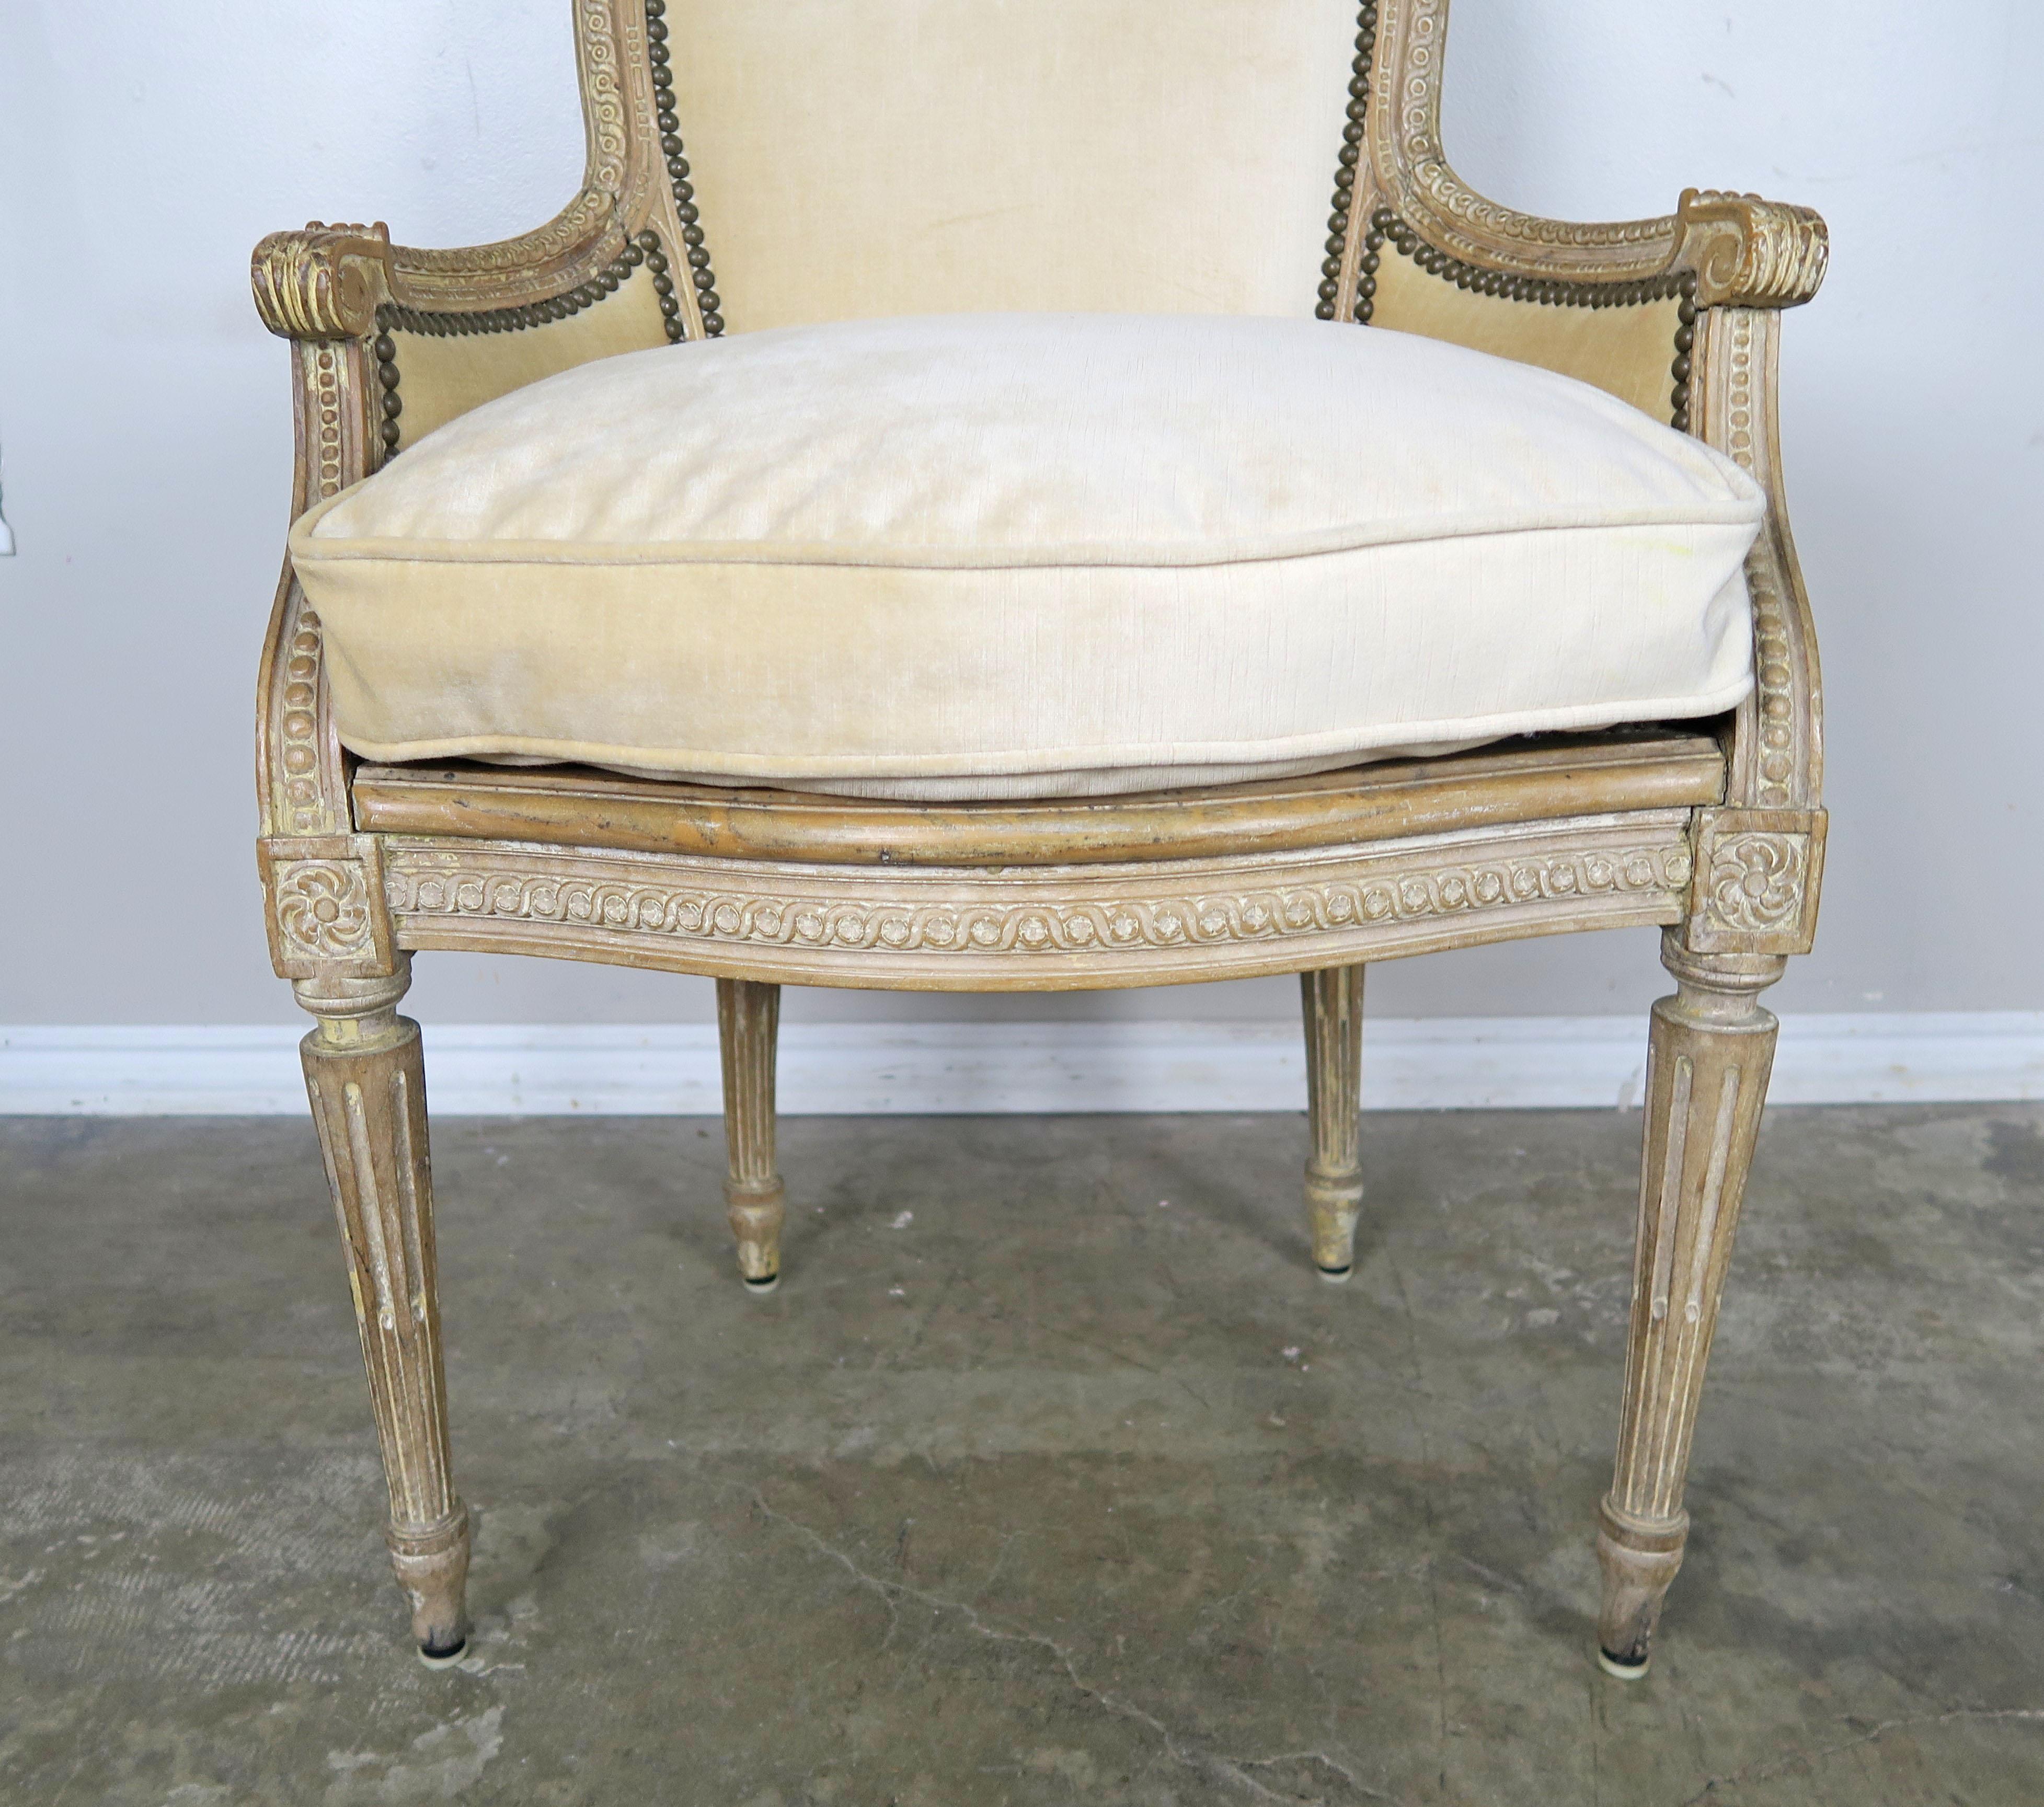 Charming French Louis XVI style carved occasional or vanity chair in a natural wood finish. The chair is newly upholstered in a cream colored velvet and finished with antique bronze colored nailhead detail. The frame is intricately carved with